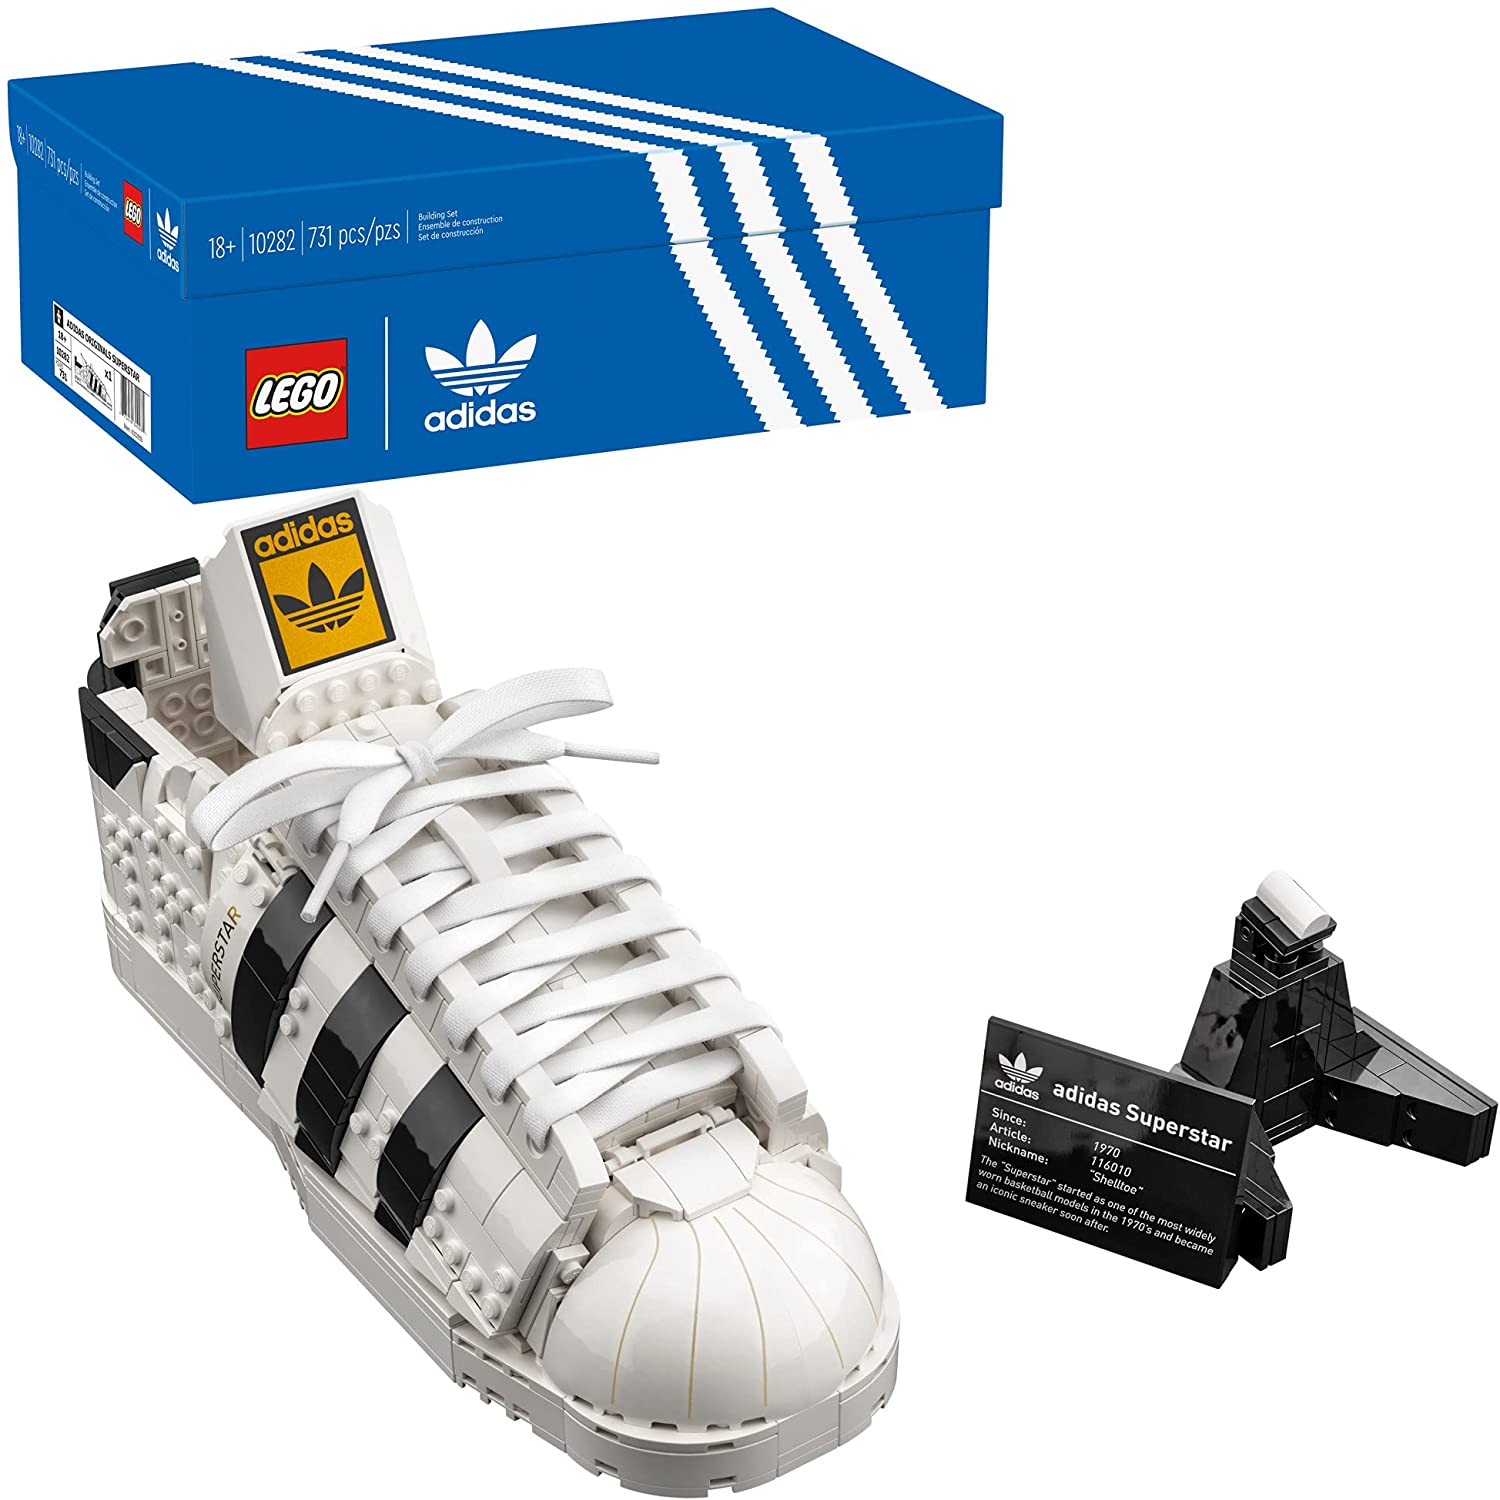 adidas superstar lego set for adults